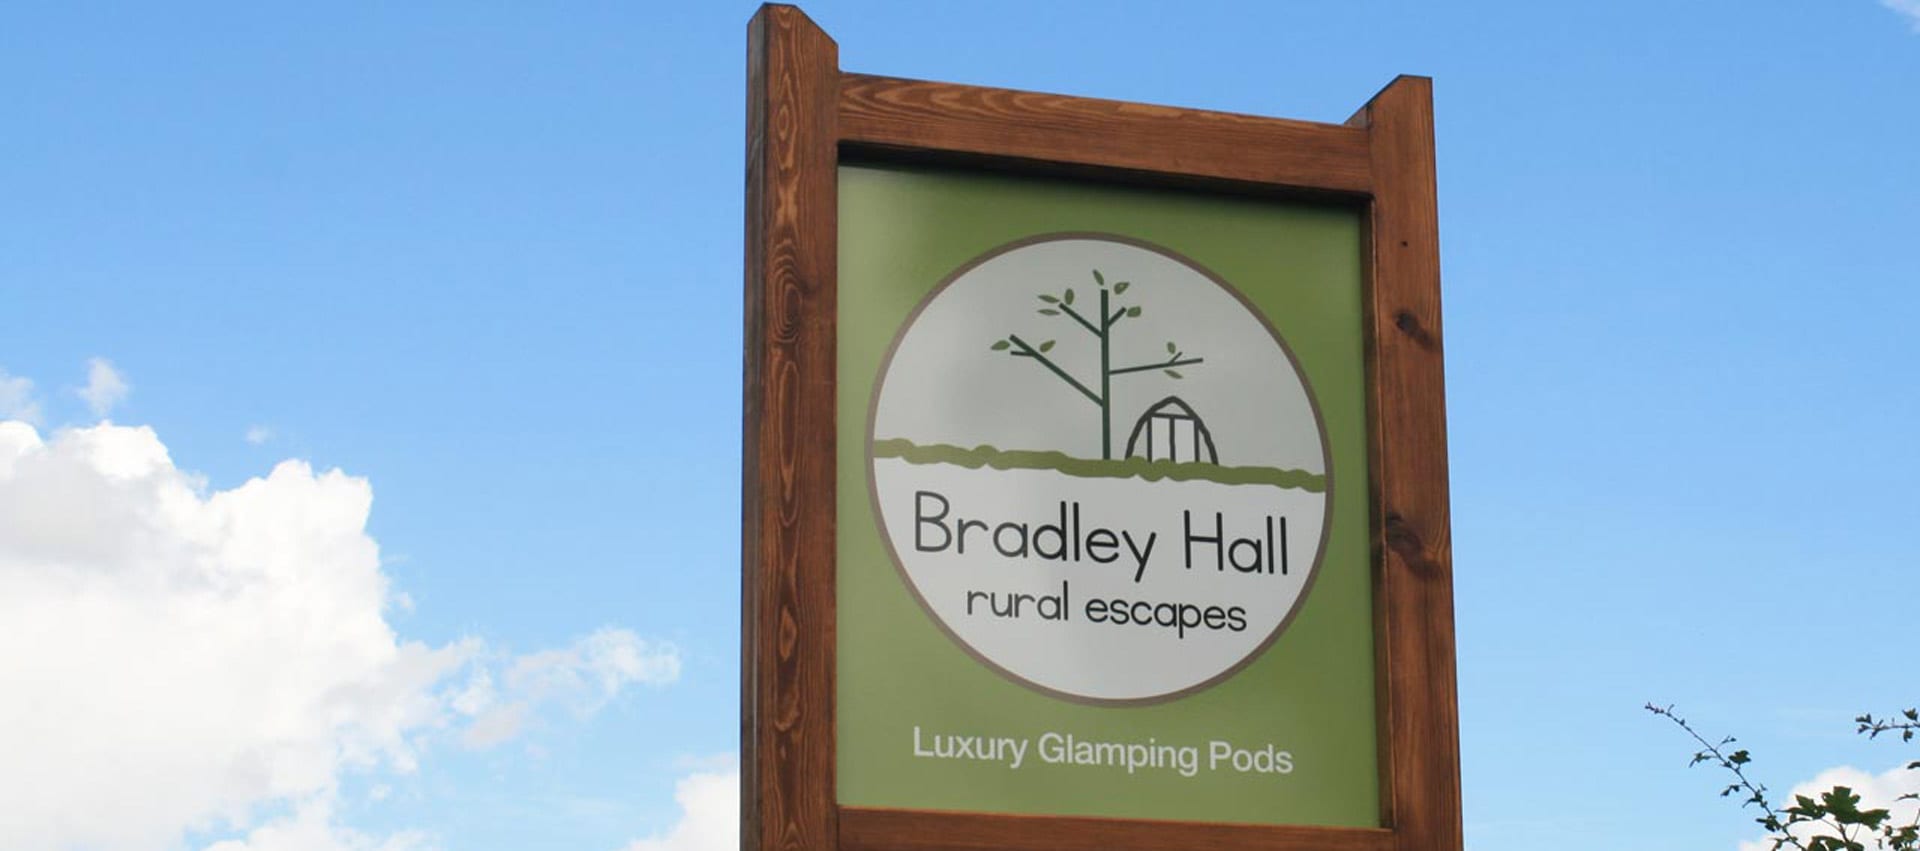 Signpost at Bradley Hall Rural Escapes - Luxurious Glamping Pods on a working farm in Cheshire